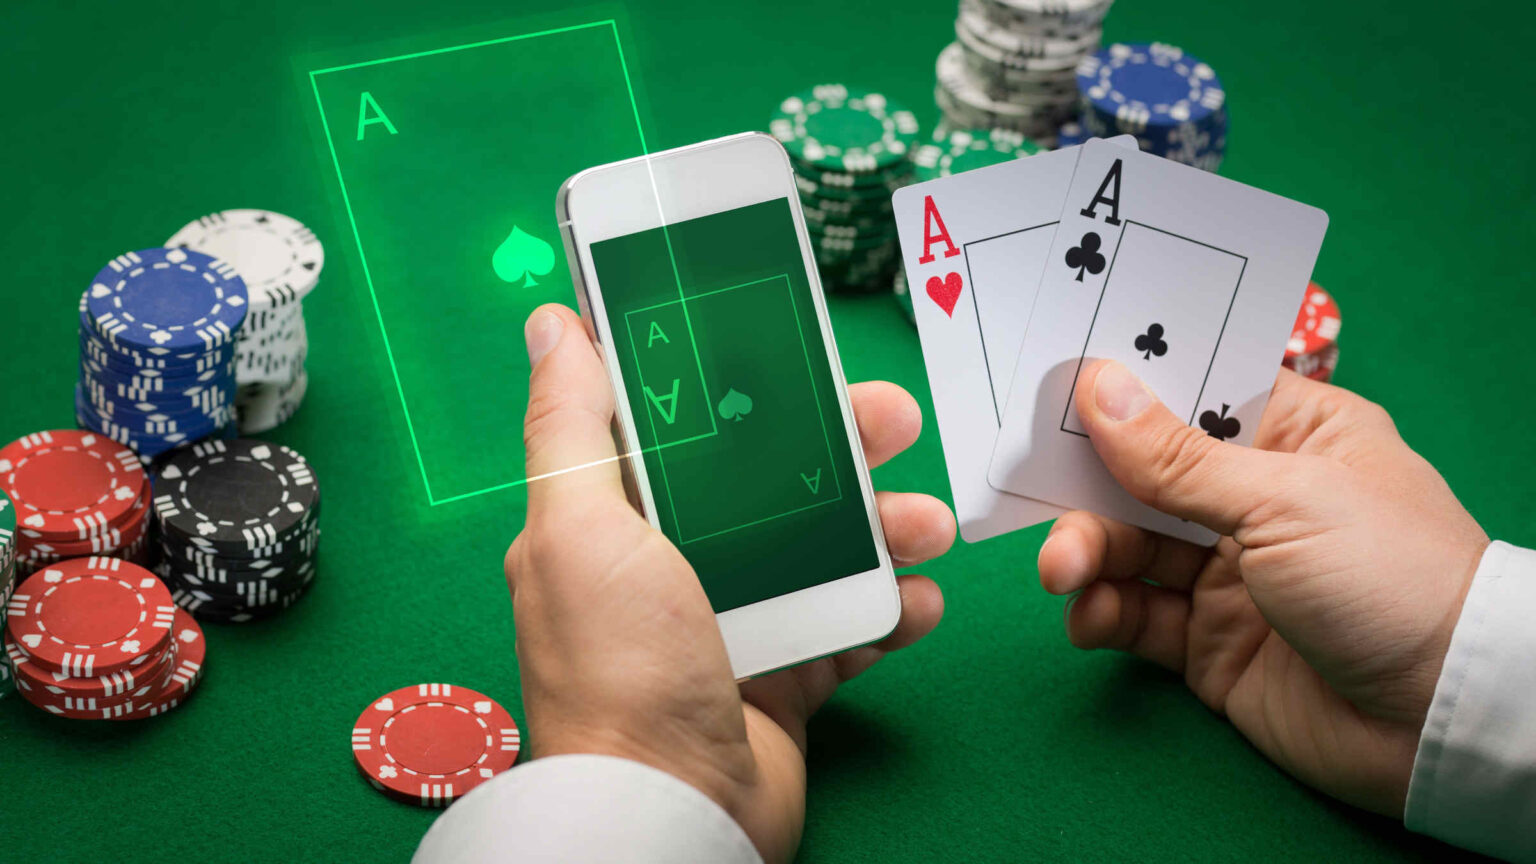 The world of the online casino is changing its technology just as rapidly as the rest of the world. Learn more about the newest gambling trends!